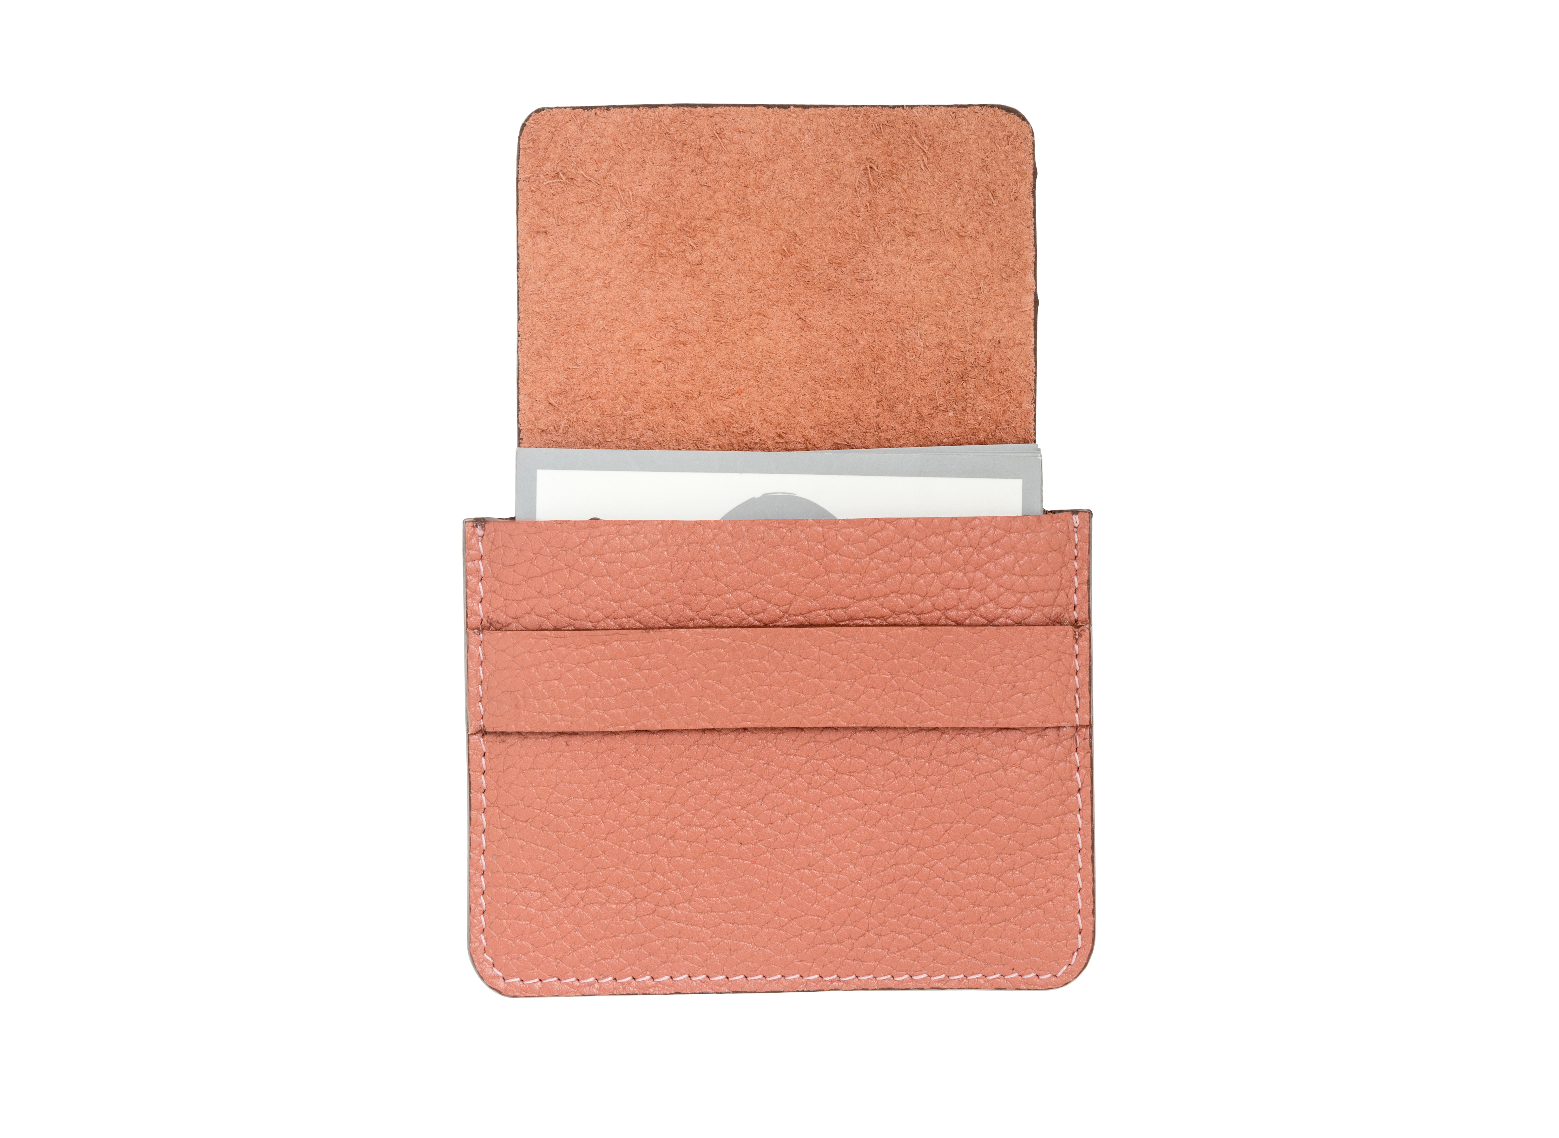 Suave business card case with flap - Blush